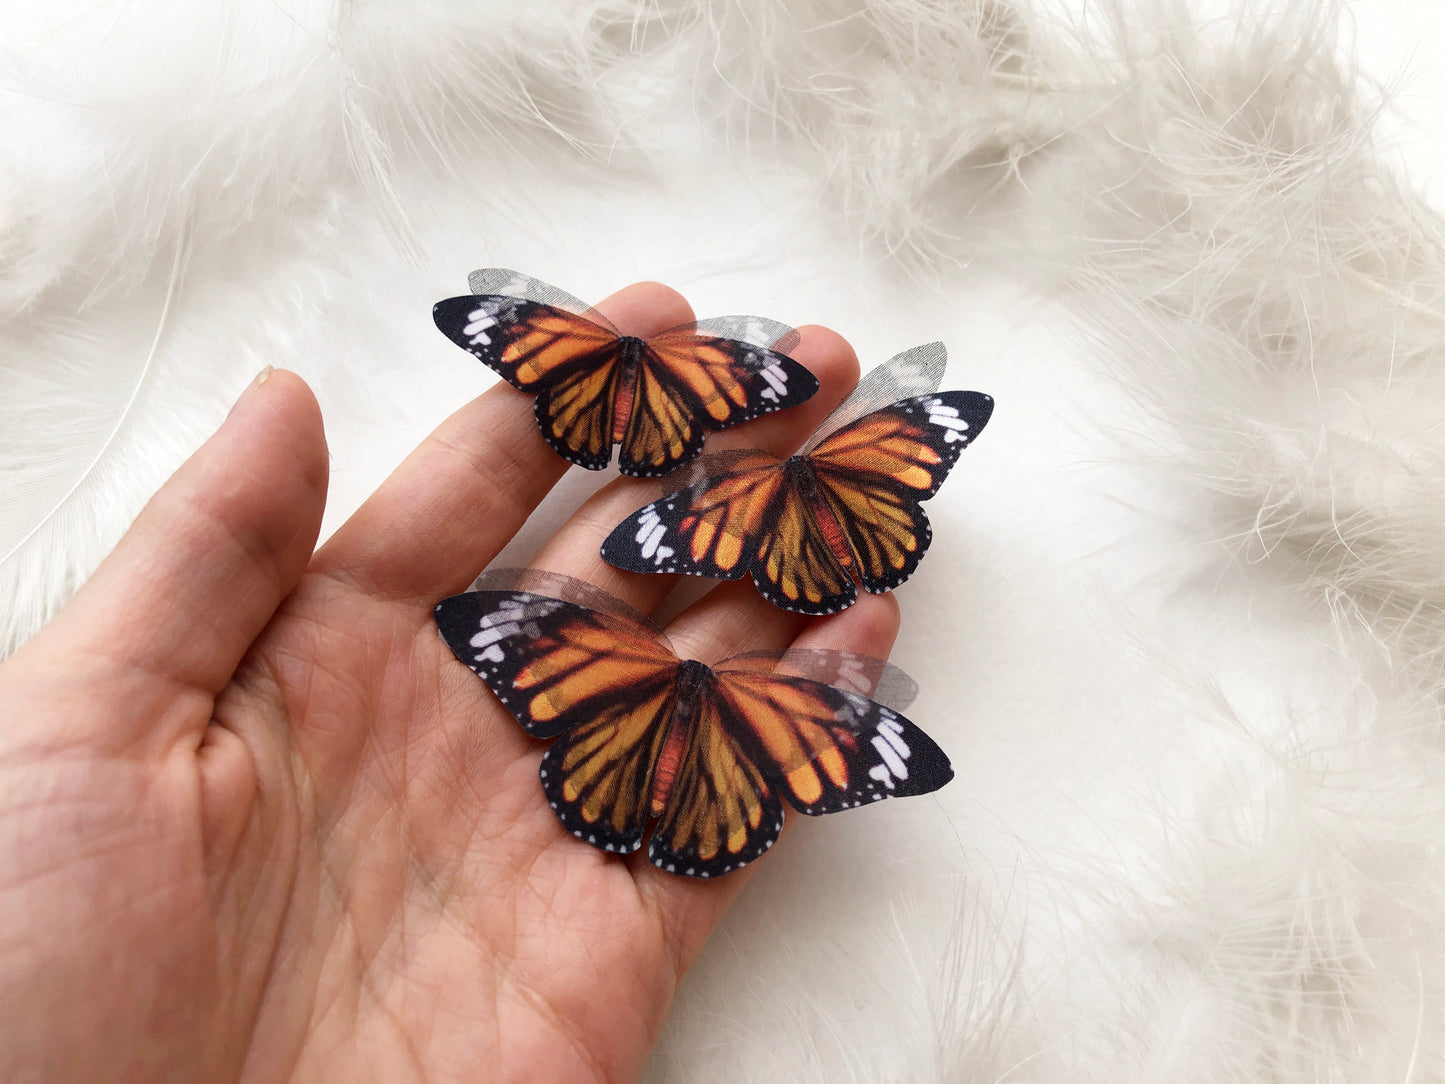 3 Monarch Butterflies on hand with white background